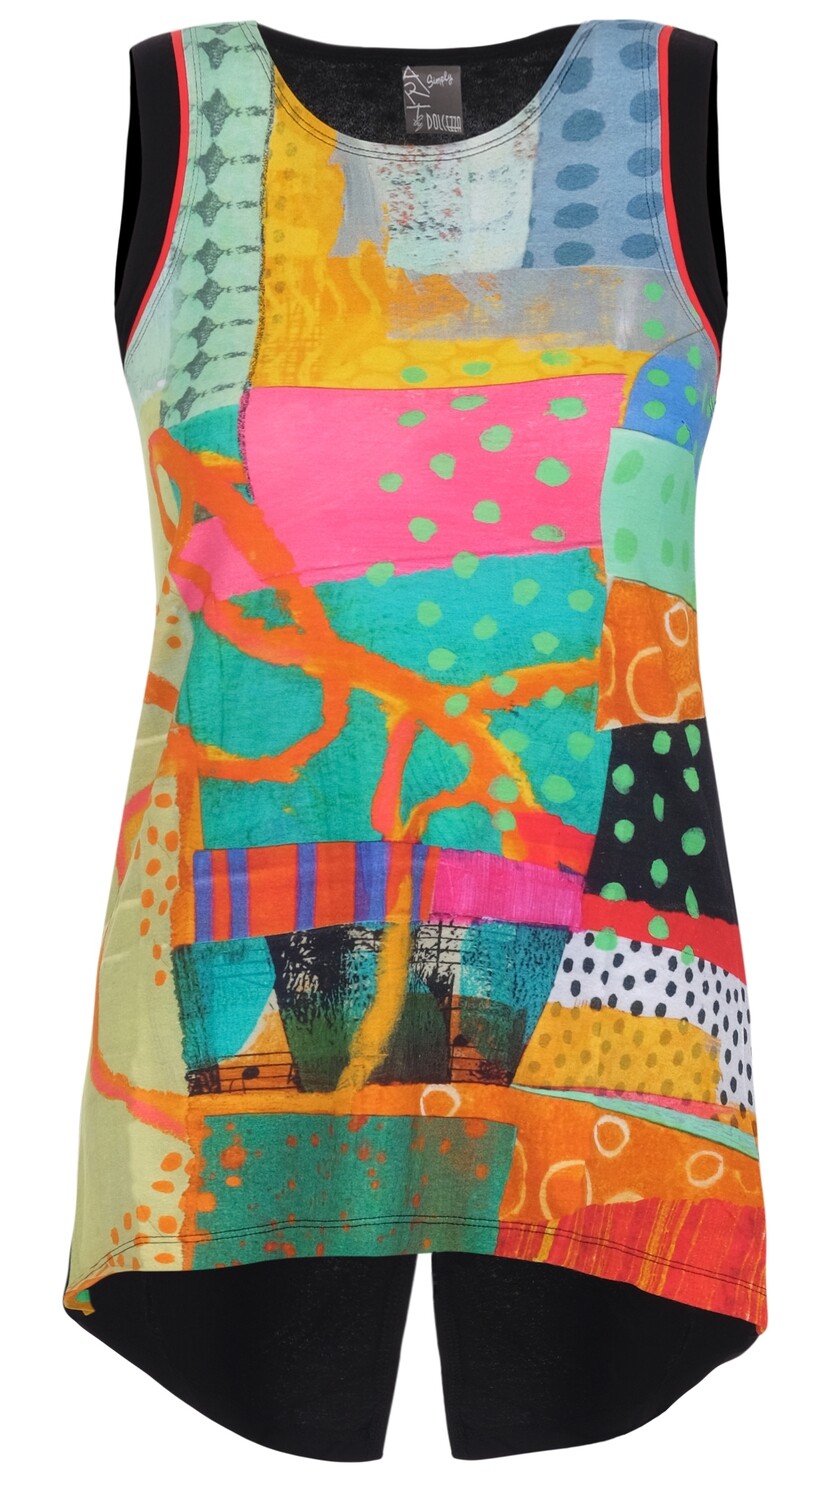 Simply Art Dolcezza: Leisurely Love Stowe In October Abstract Art Split Tunic (2 Left!)